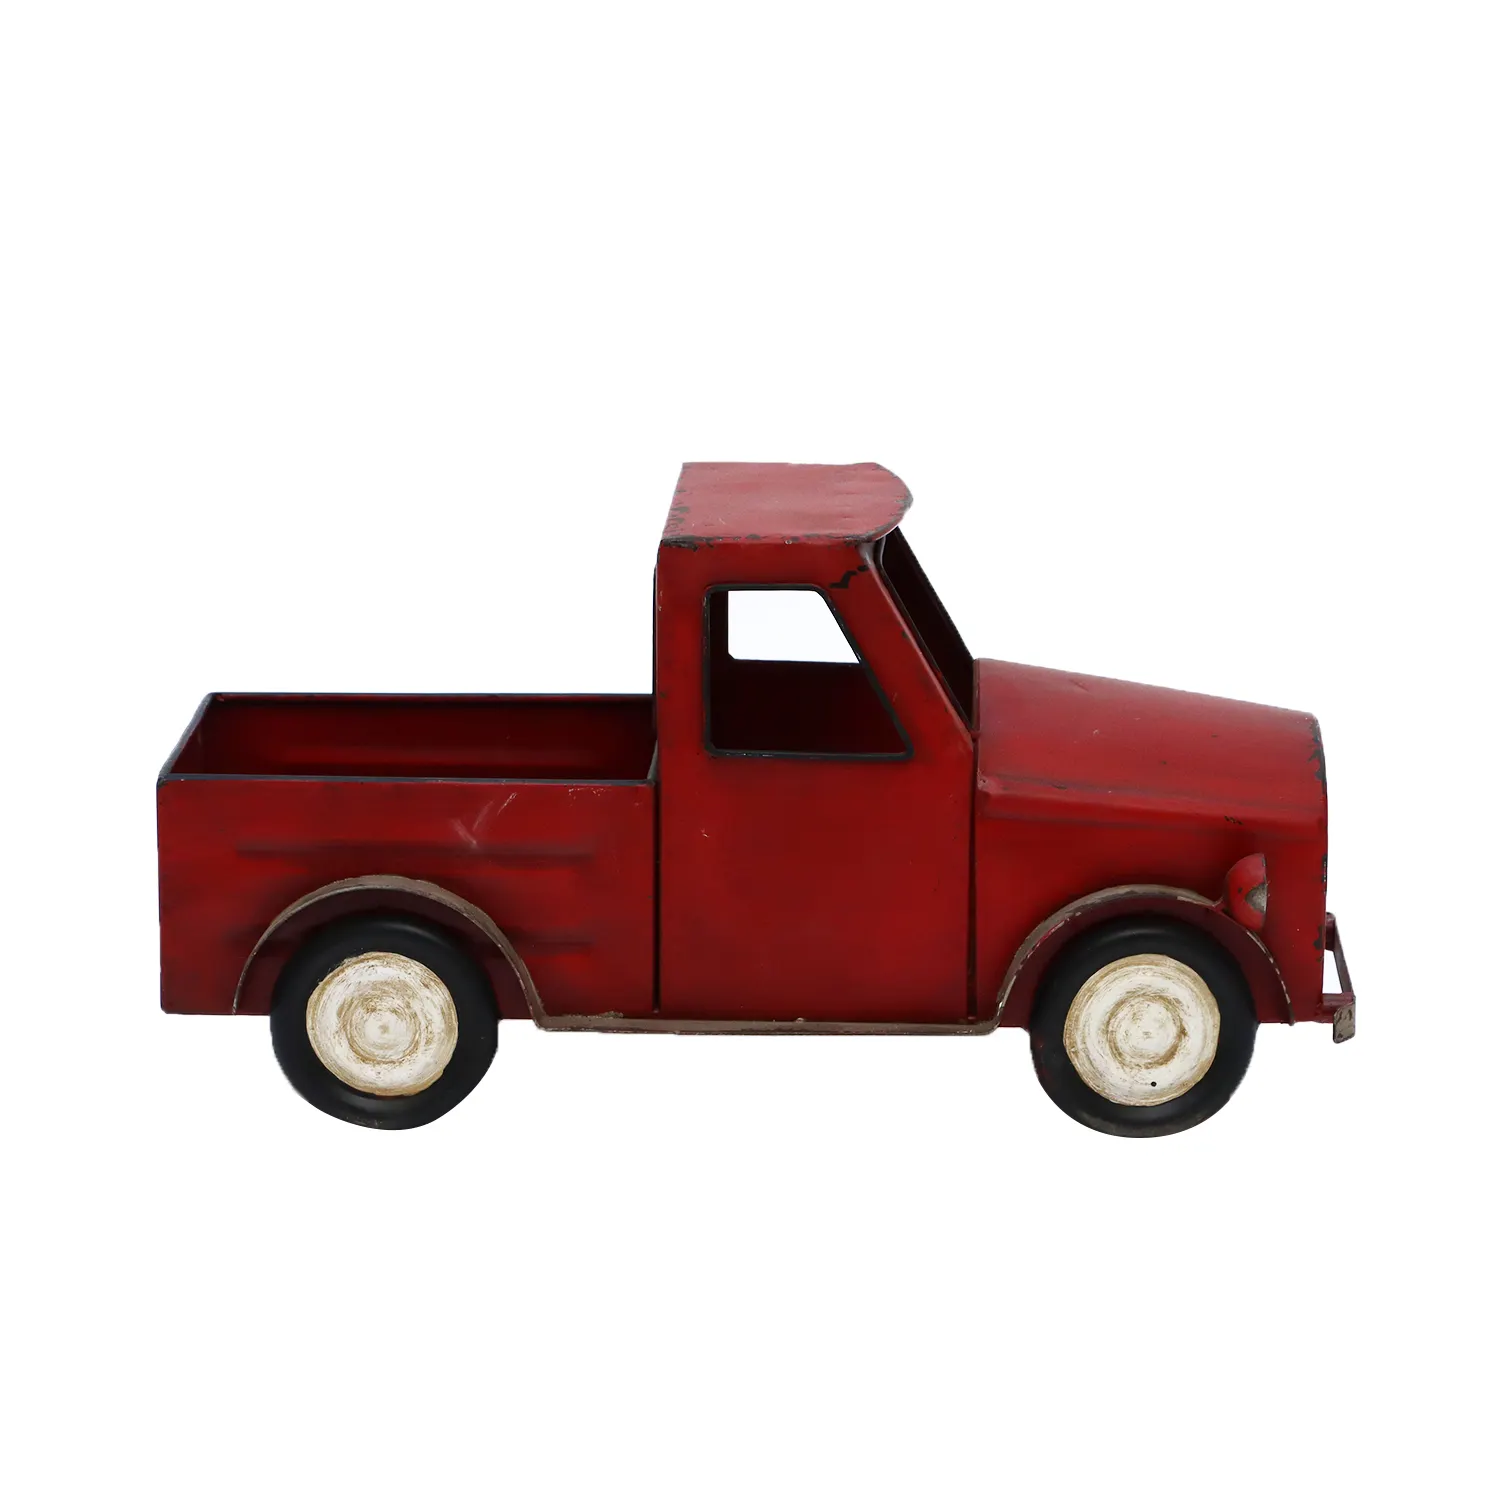 Factory Hot Sales Christmas Decorations Tabletop Storage Holiday Vintage Red Truck Table Decor Farmhouse Metal Truck Planter